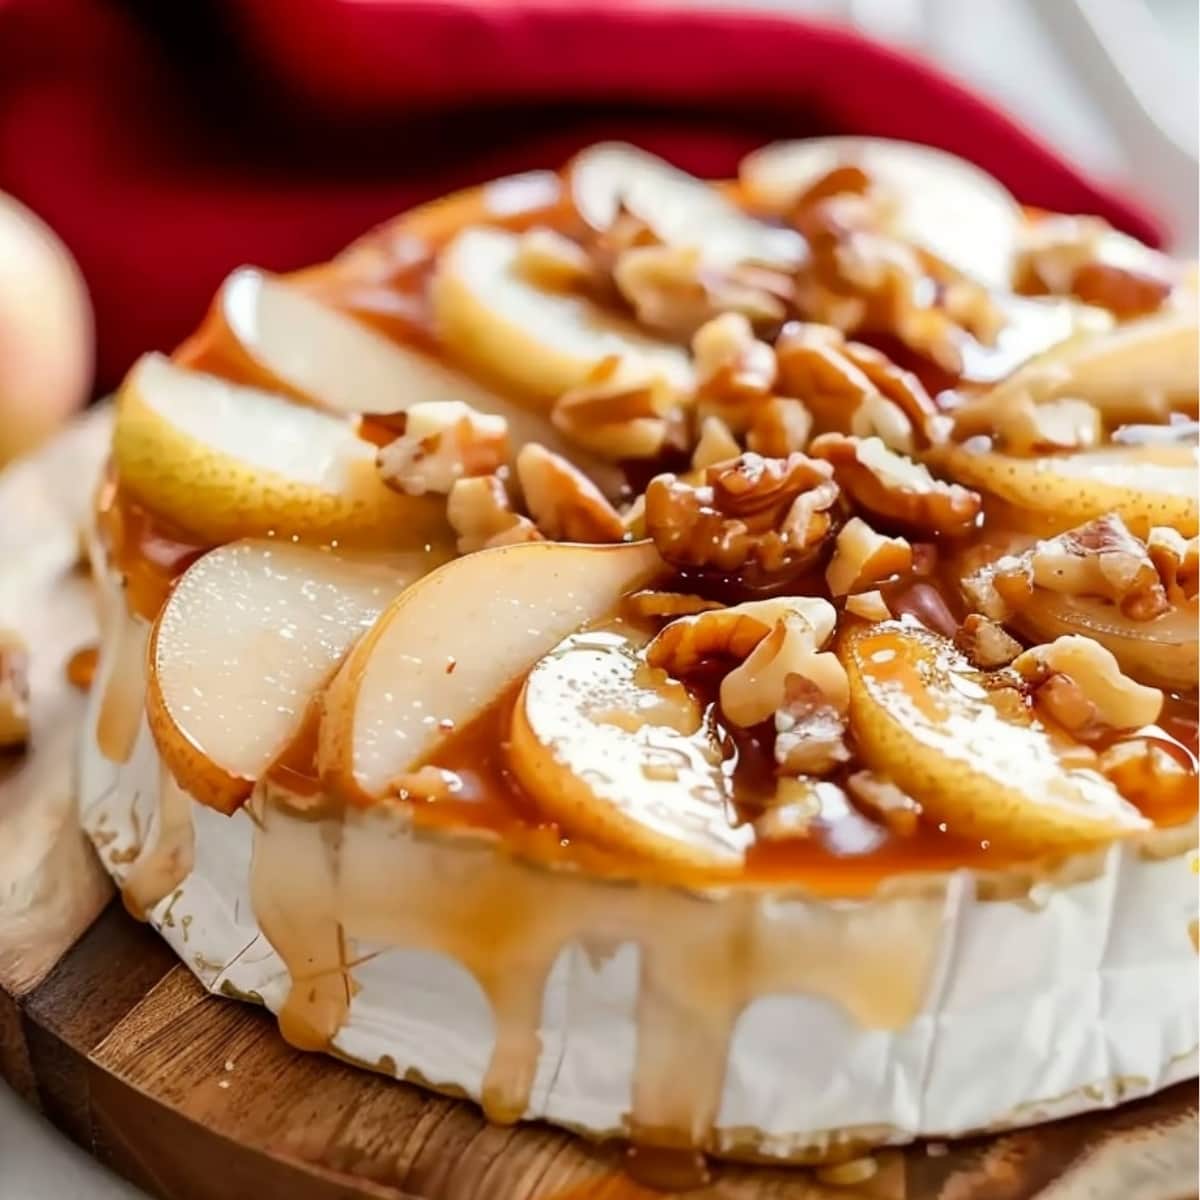 A round wheel of baked brie cheese topped with sliced pears and walnuts